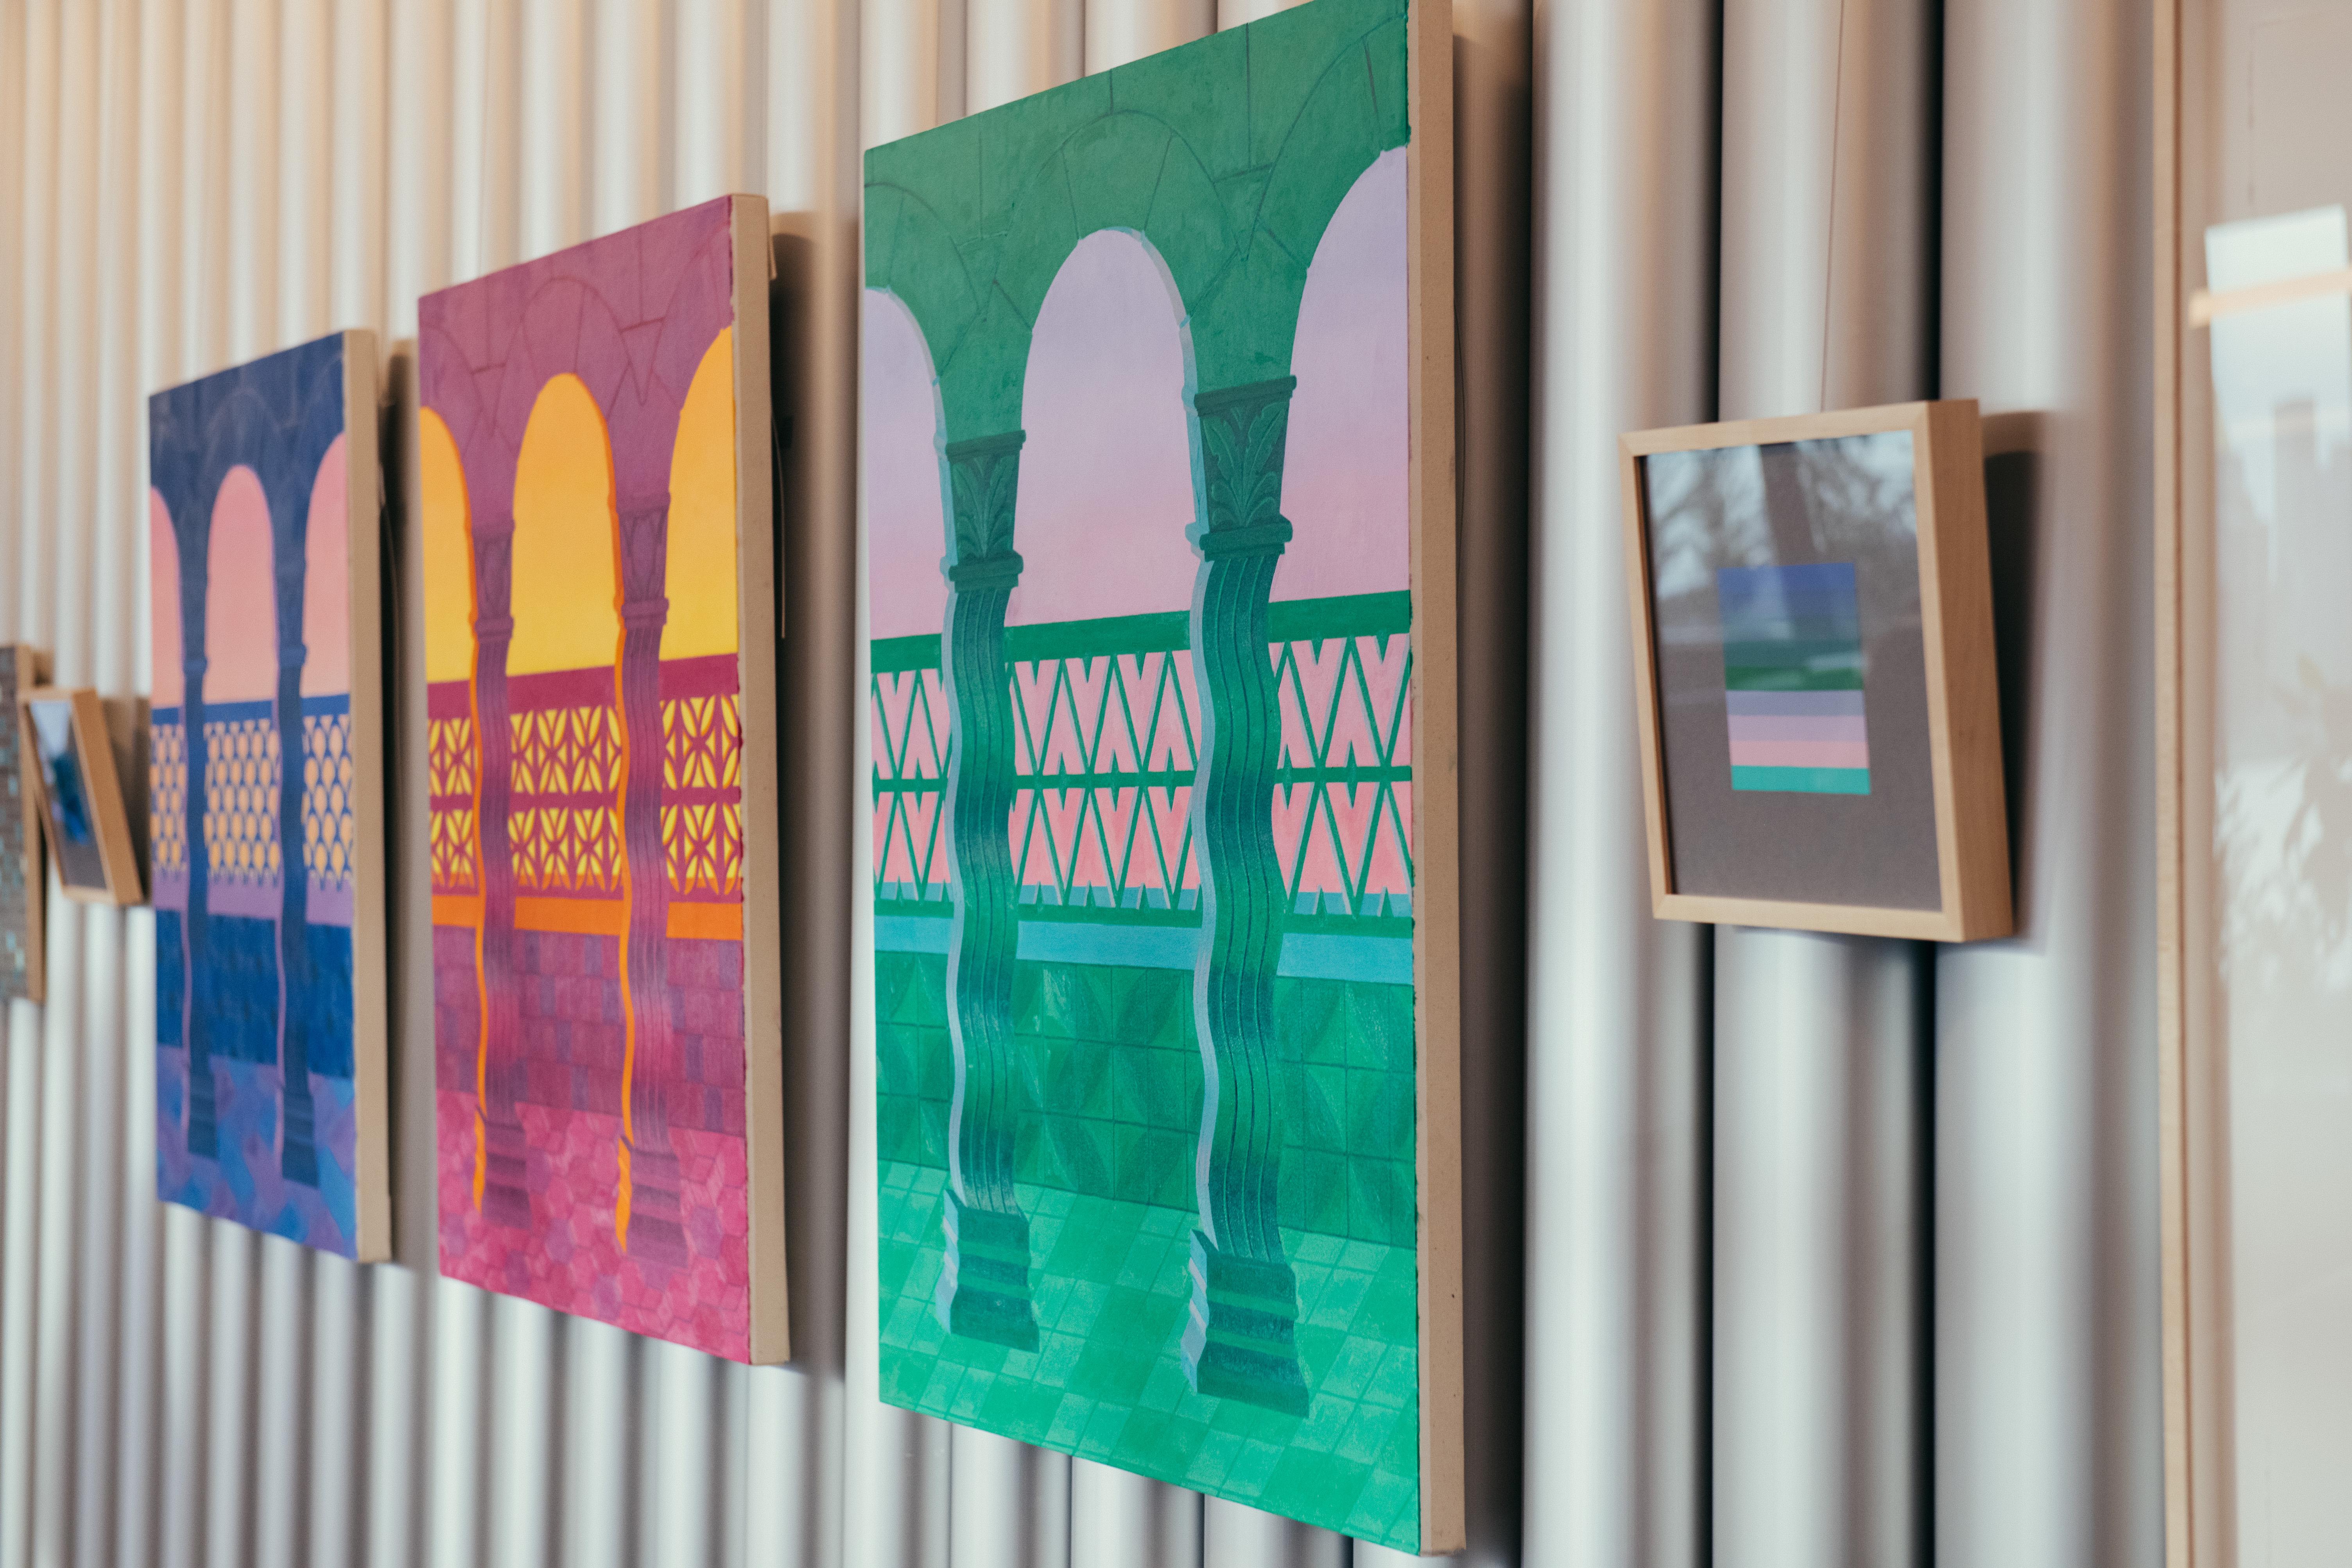 In her “Balcony” series paintings, Lucía Rodríguez Pérez uses an same architectural mindset by constructing images of pillars and the surrounding sky by skillfully manipulating color to create the illusion of natural light. While architects and